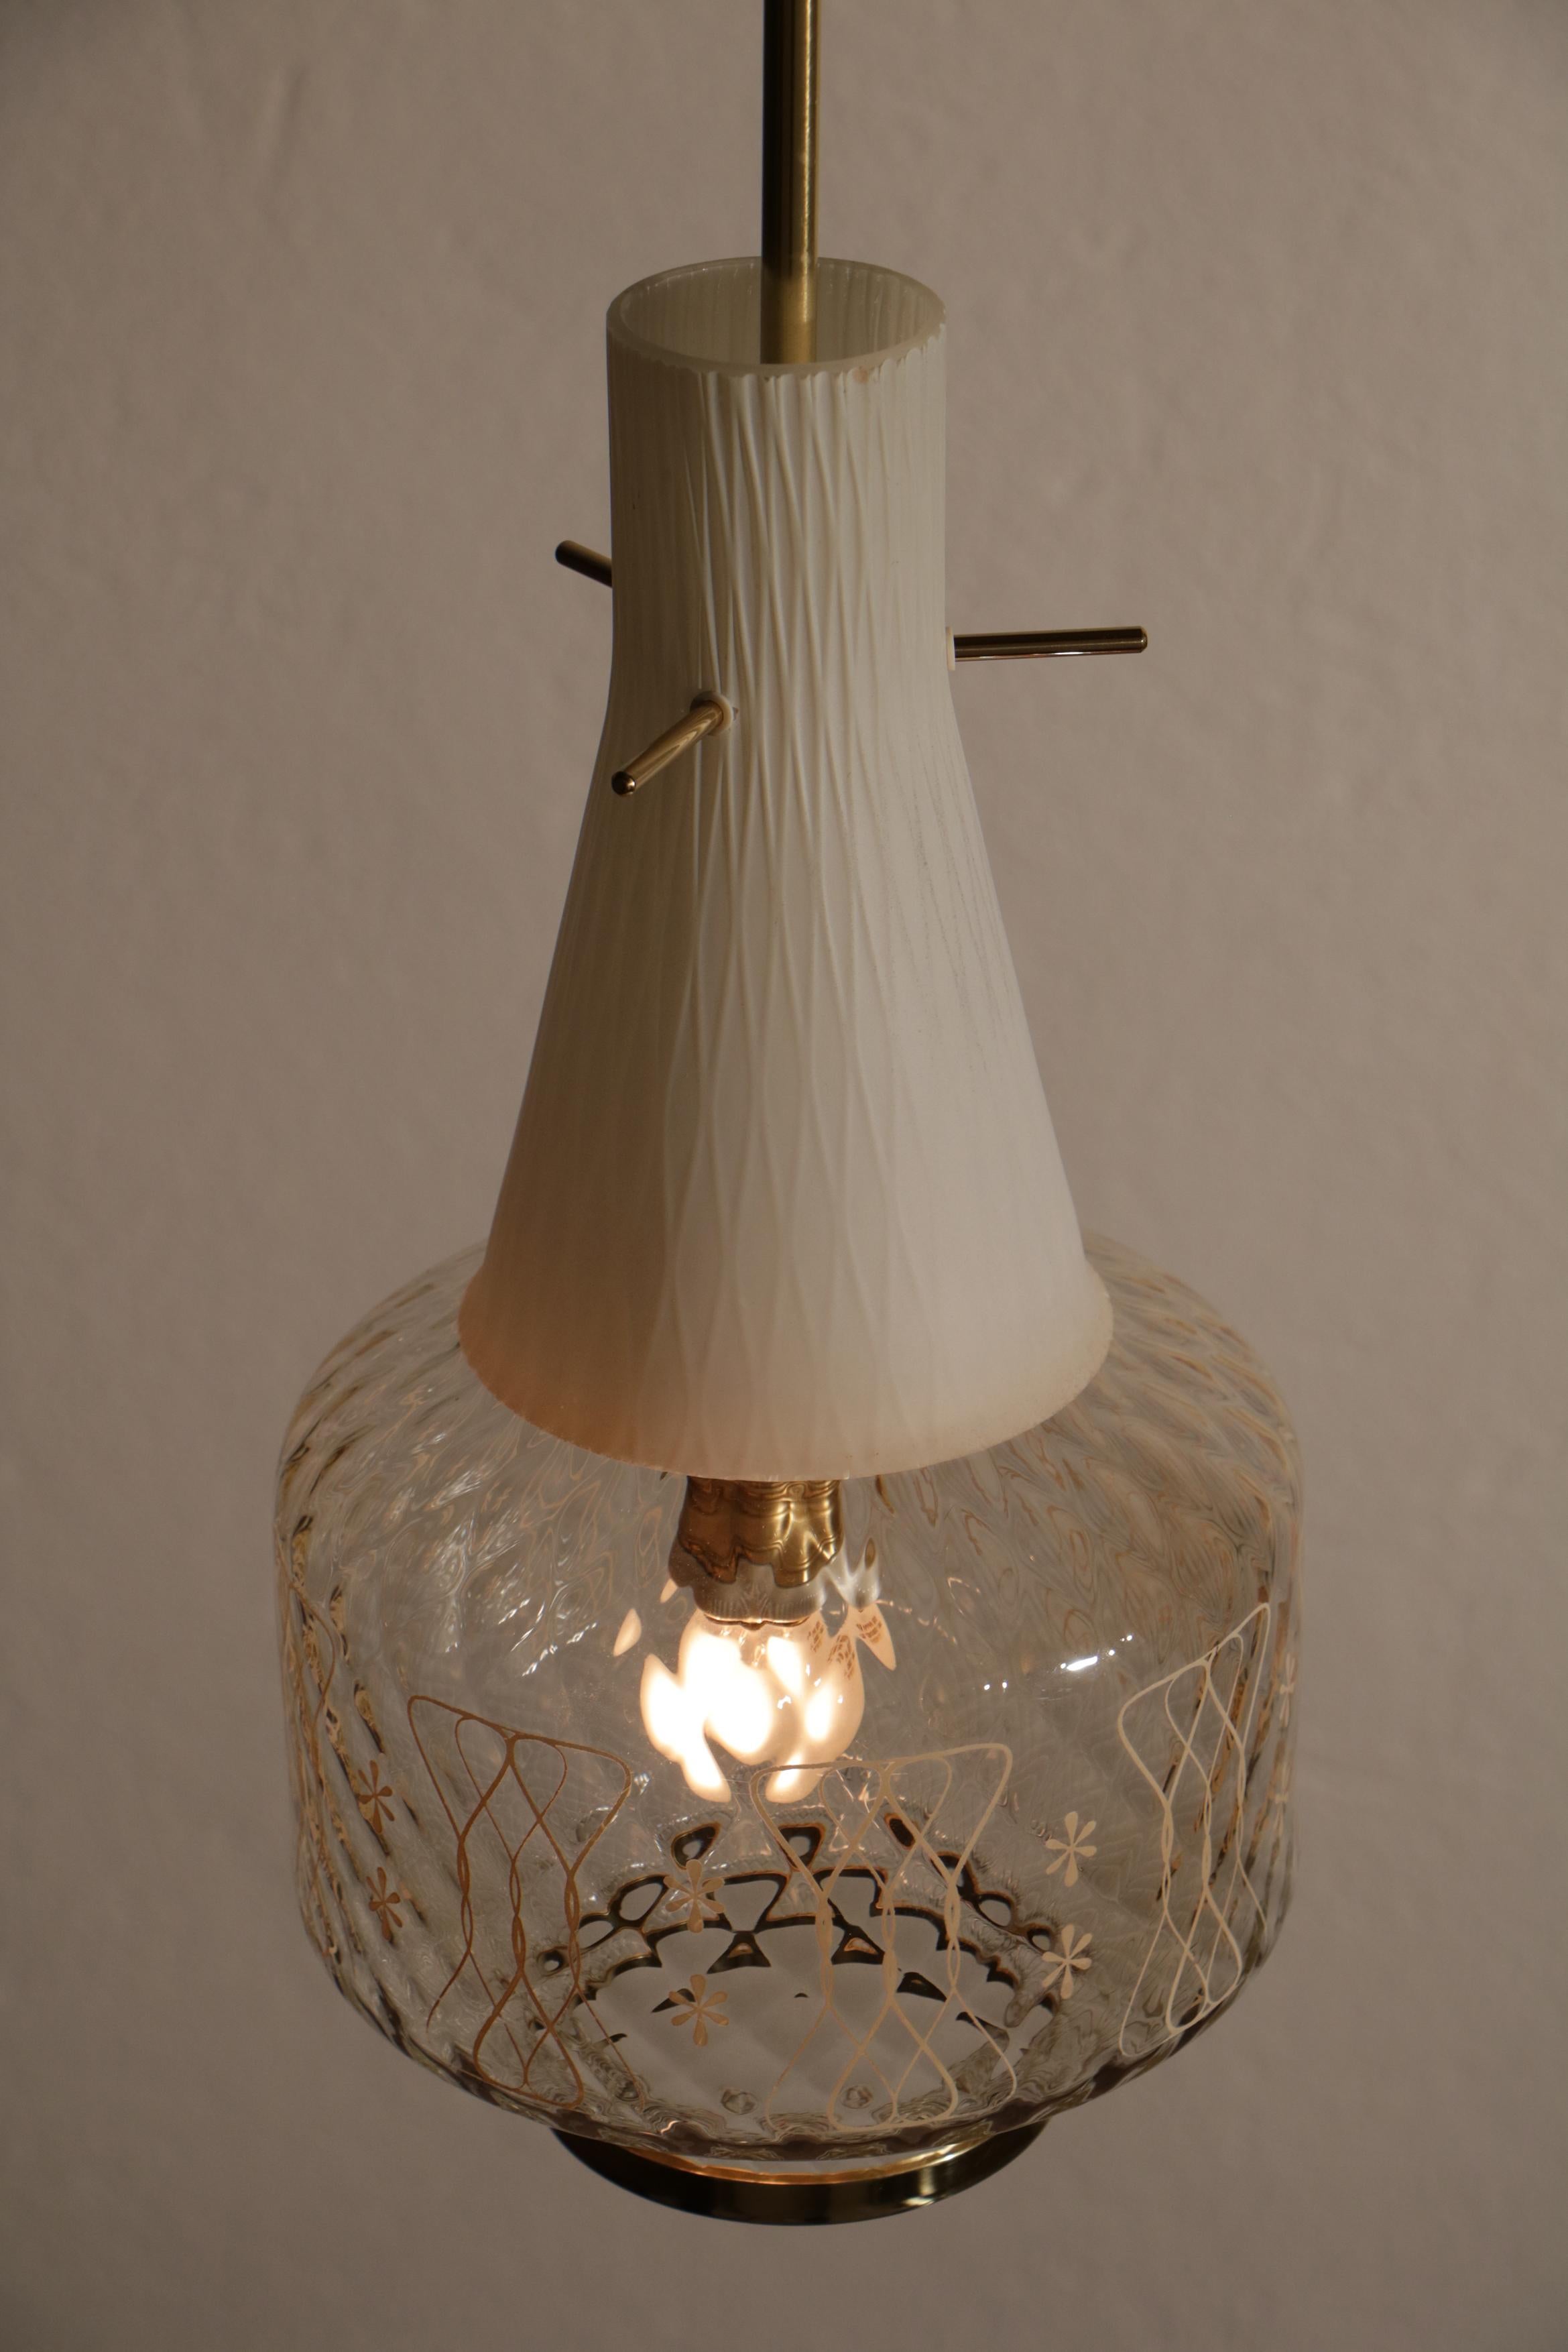 Art Glass Italian Art Deco Decorative and Satin Glass Hanging Lamp, 1950s For Sale